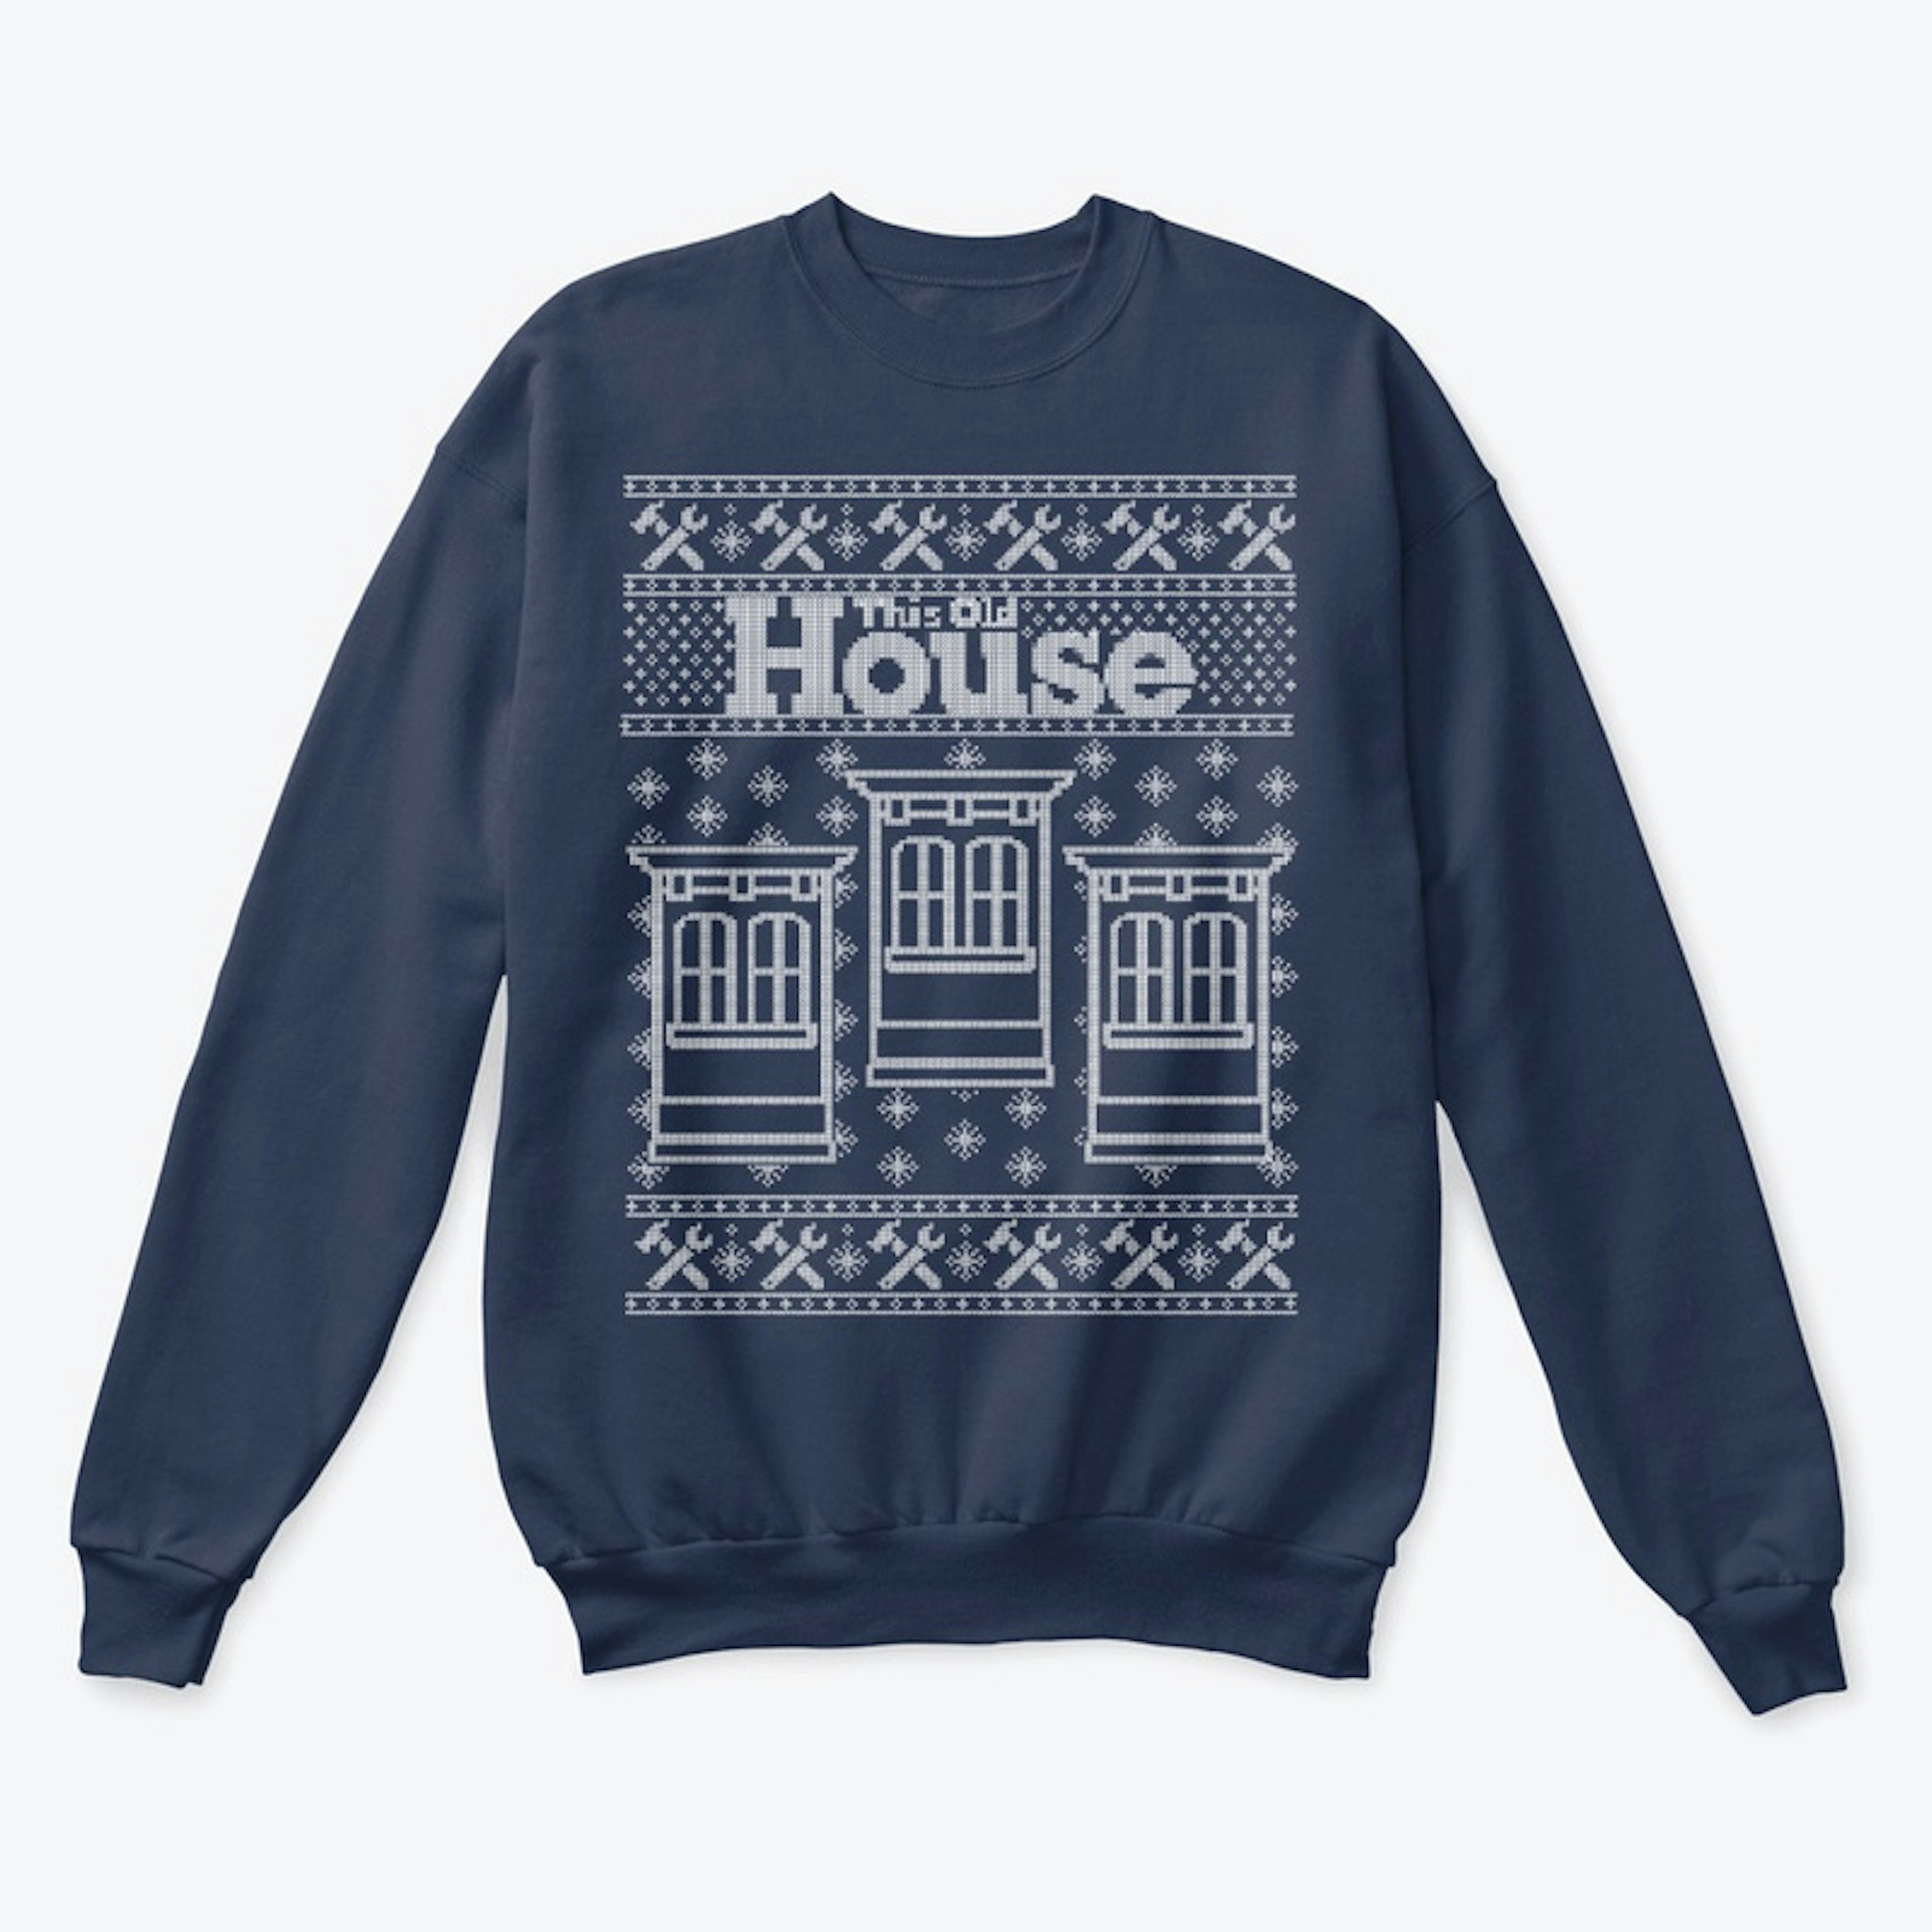 This Old House Holiday Sweatshirt